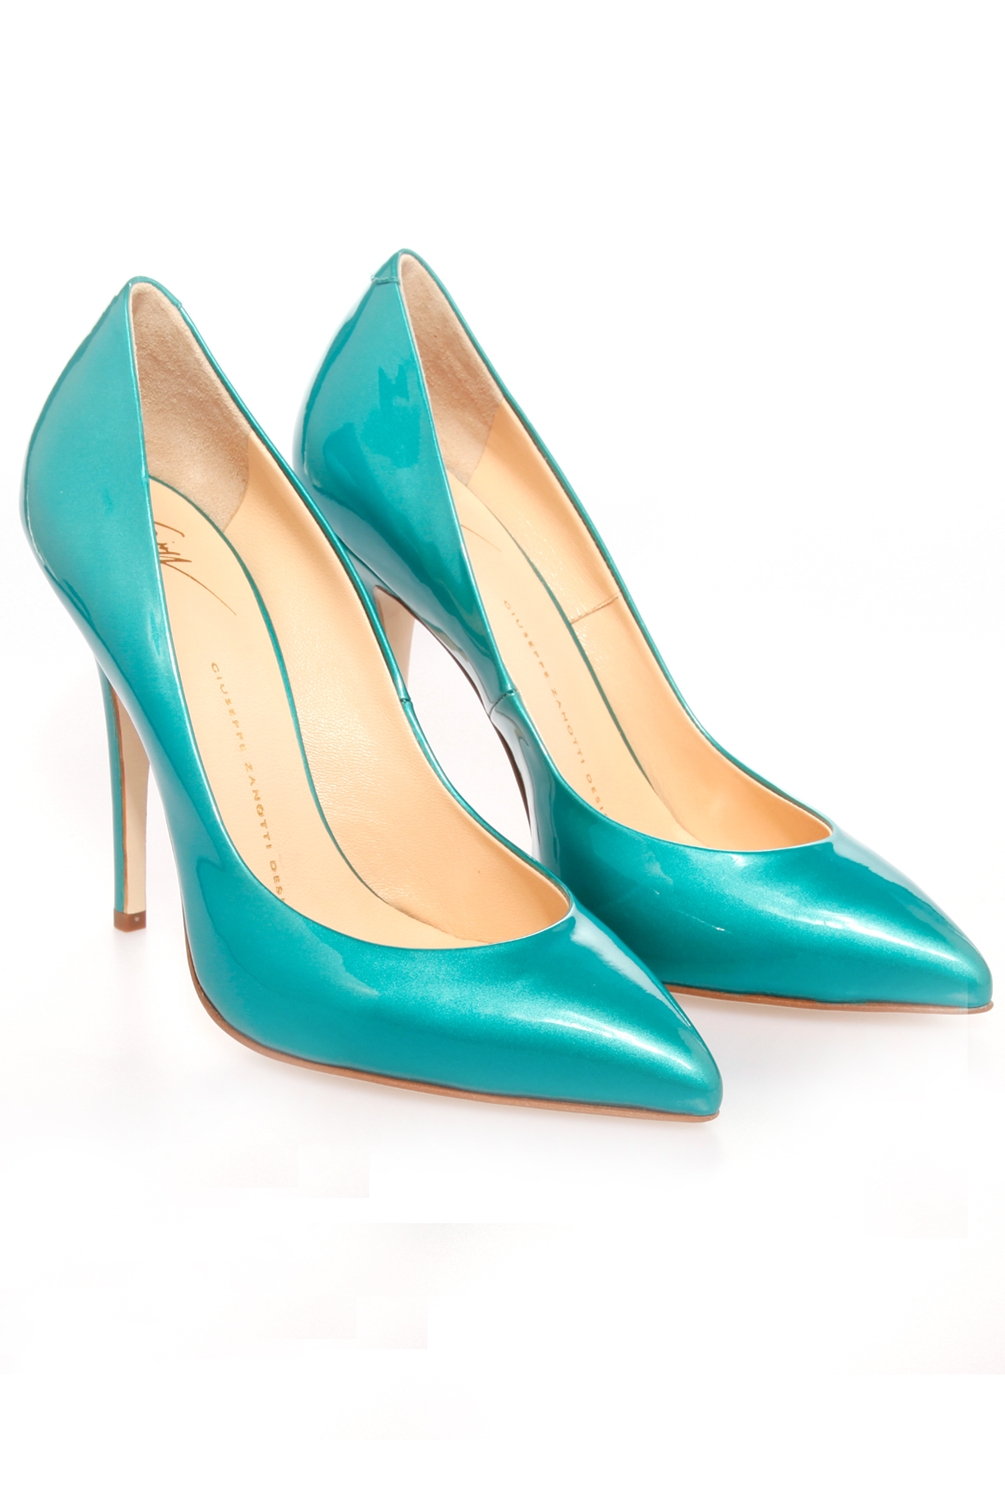 Giuseppe Zanotti Turquoise Pointed Heel Pumps in Blue - Lyst